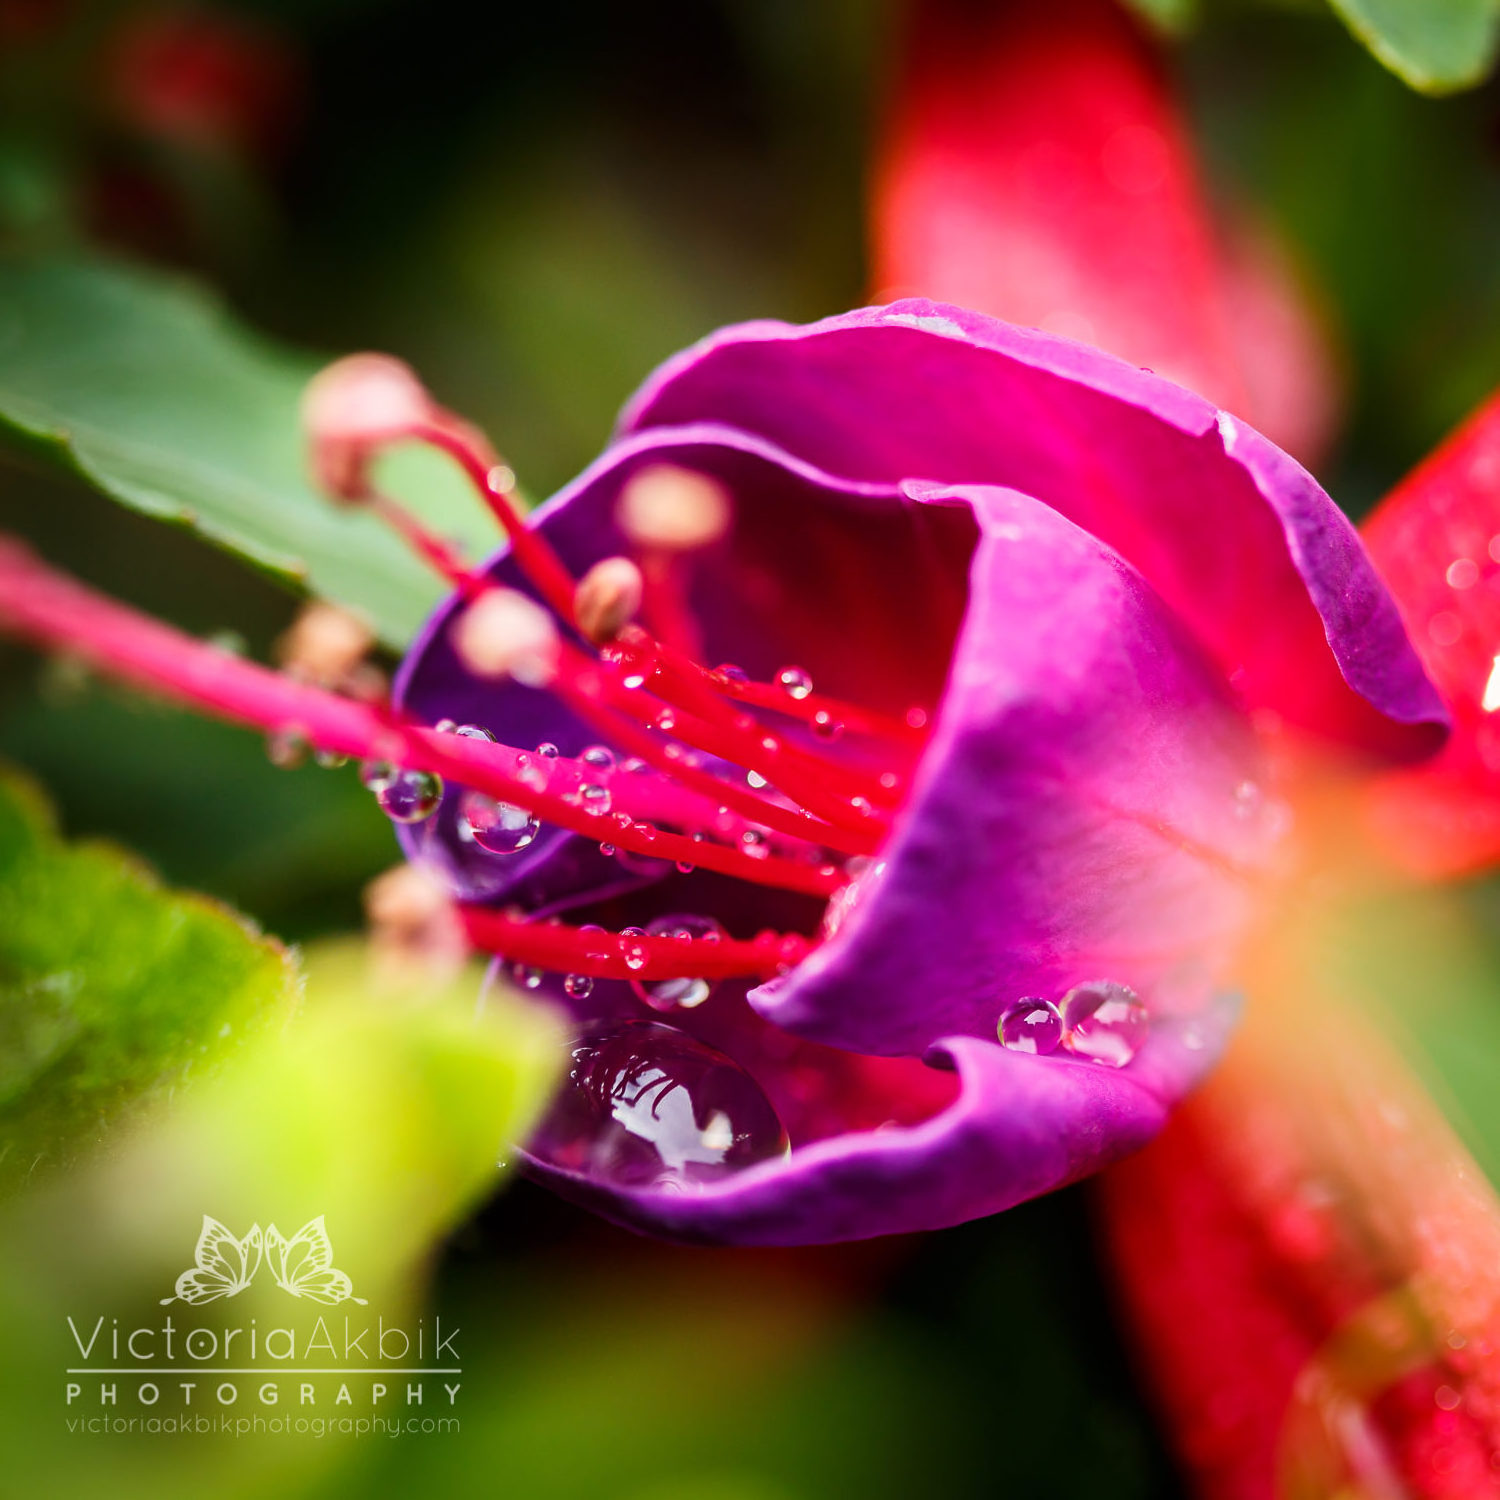 After The Rain | Lifestyle Photography » Victoria Akbik Photography